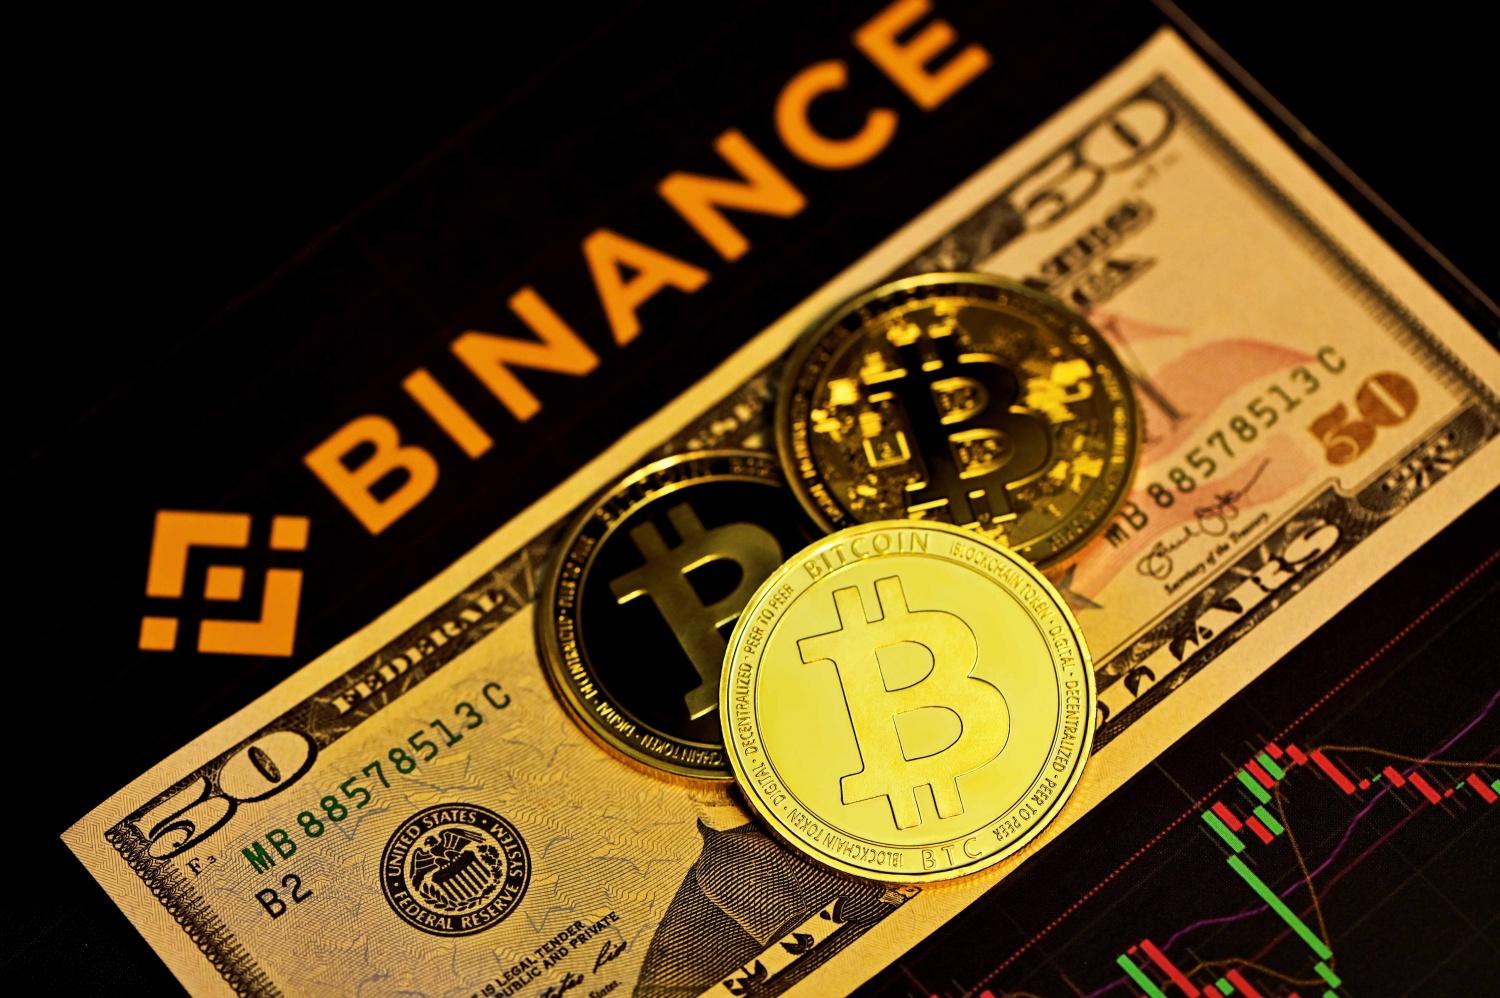 Binance Faces $1.6 Billion Crypto Withdrawal as CFTC Lawsuit Rattles Investors; Is a Shutdown Imminent?